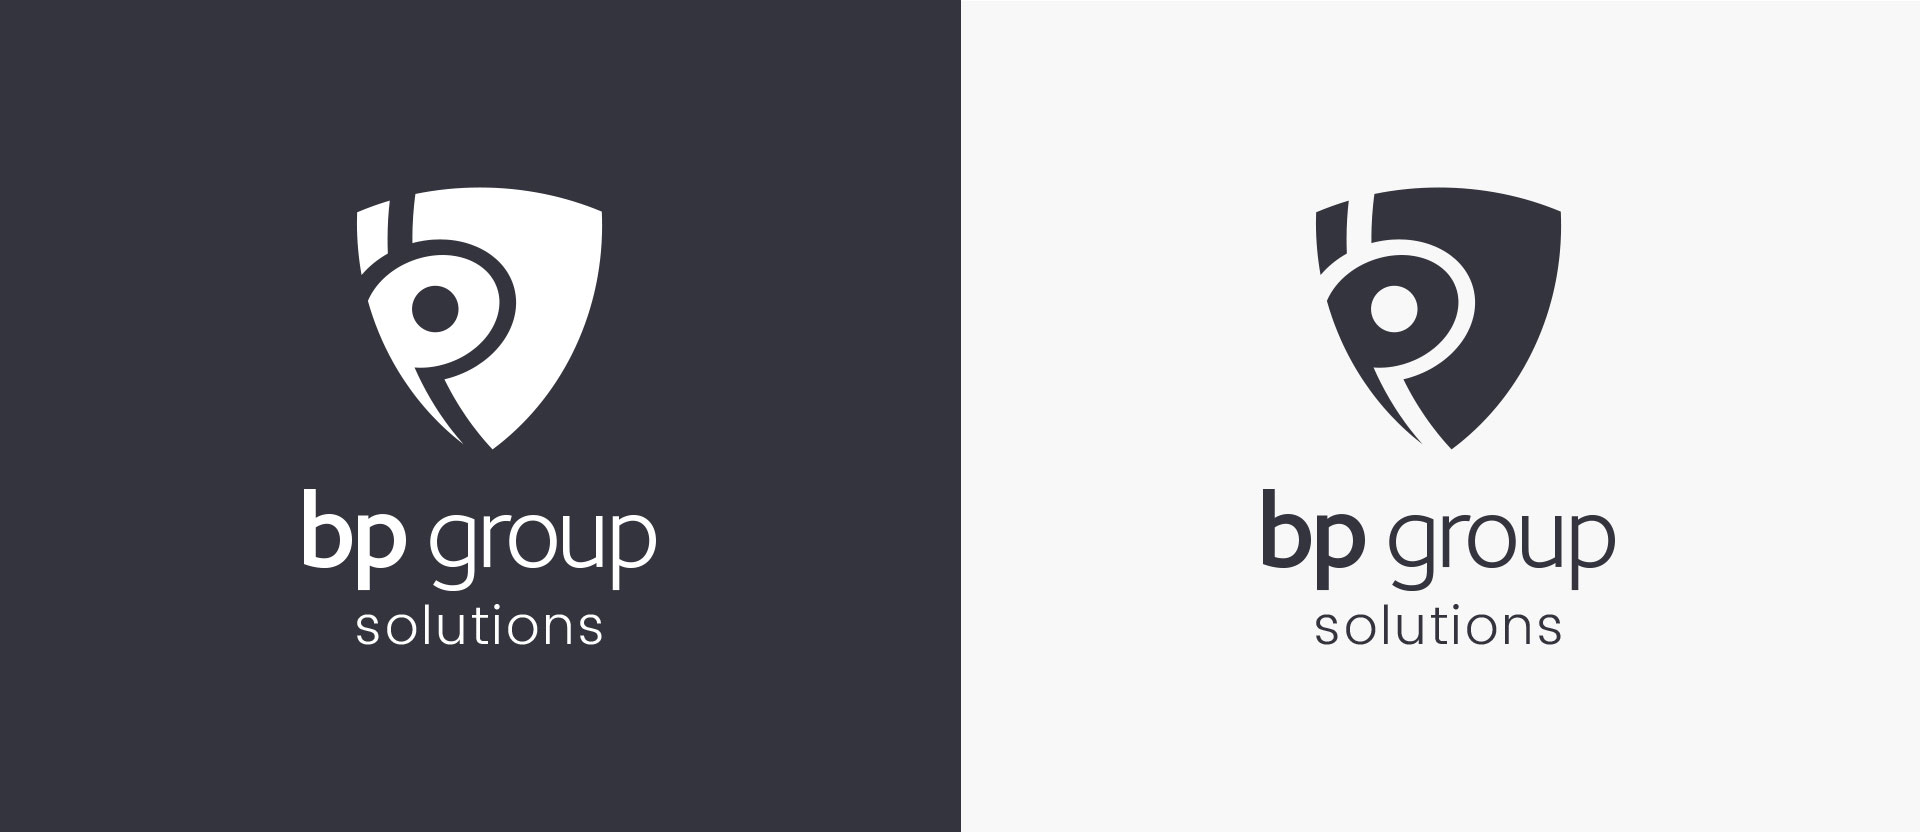 BP Group Solutions logo black and white